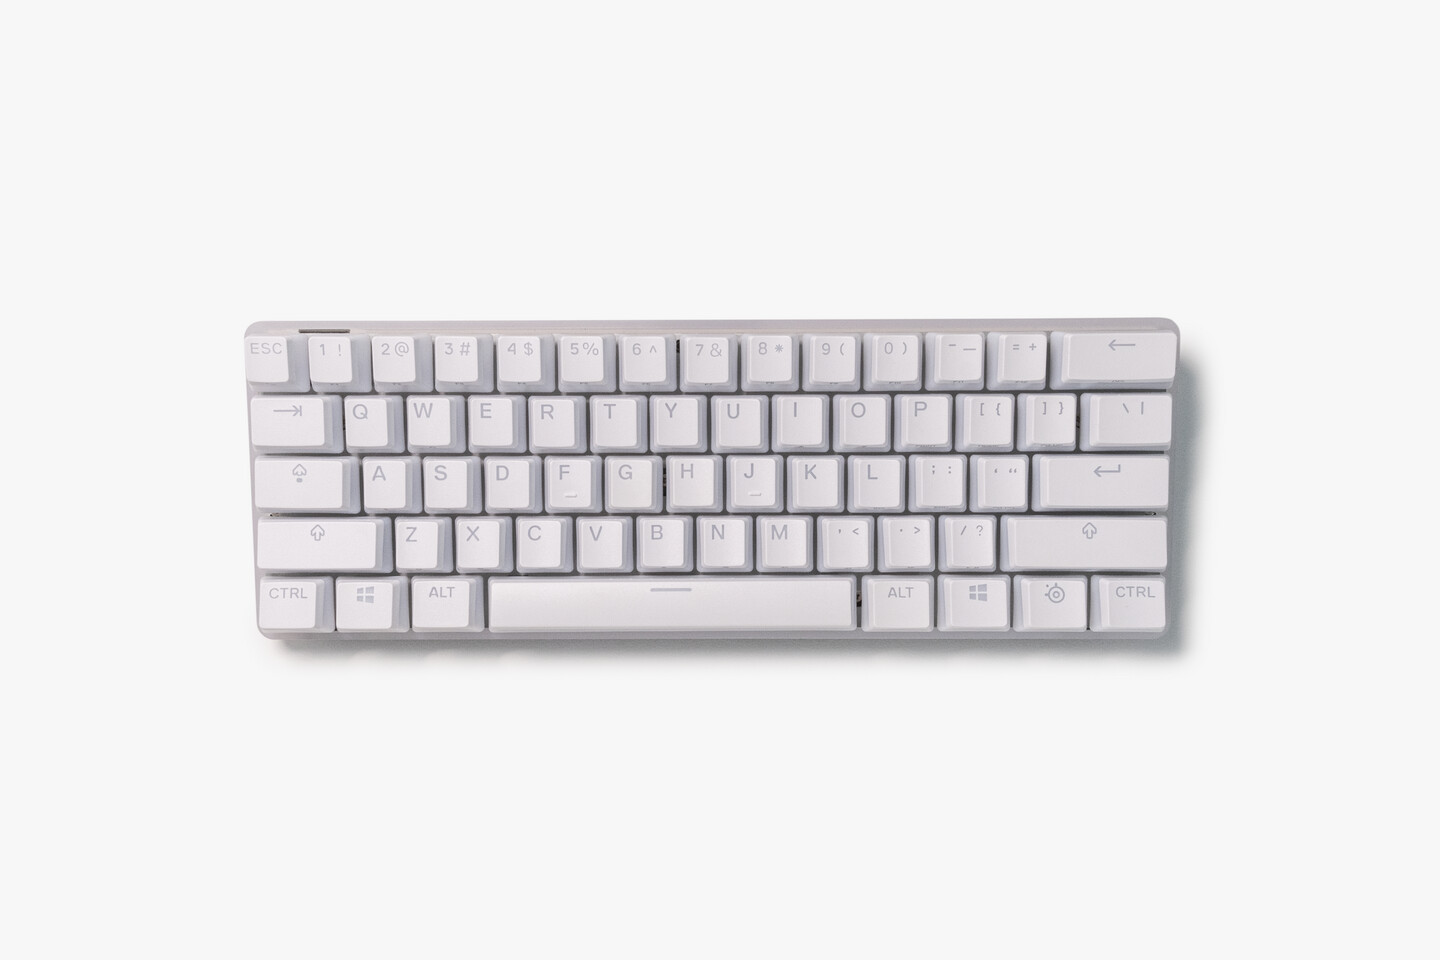 SteelSeries Outs Apex Pro Mini: Limited-Edition White x Gold Keyboard